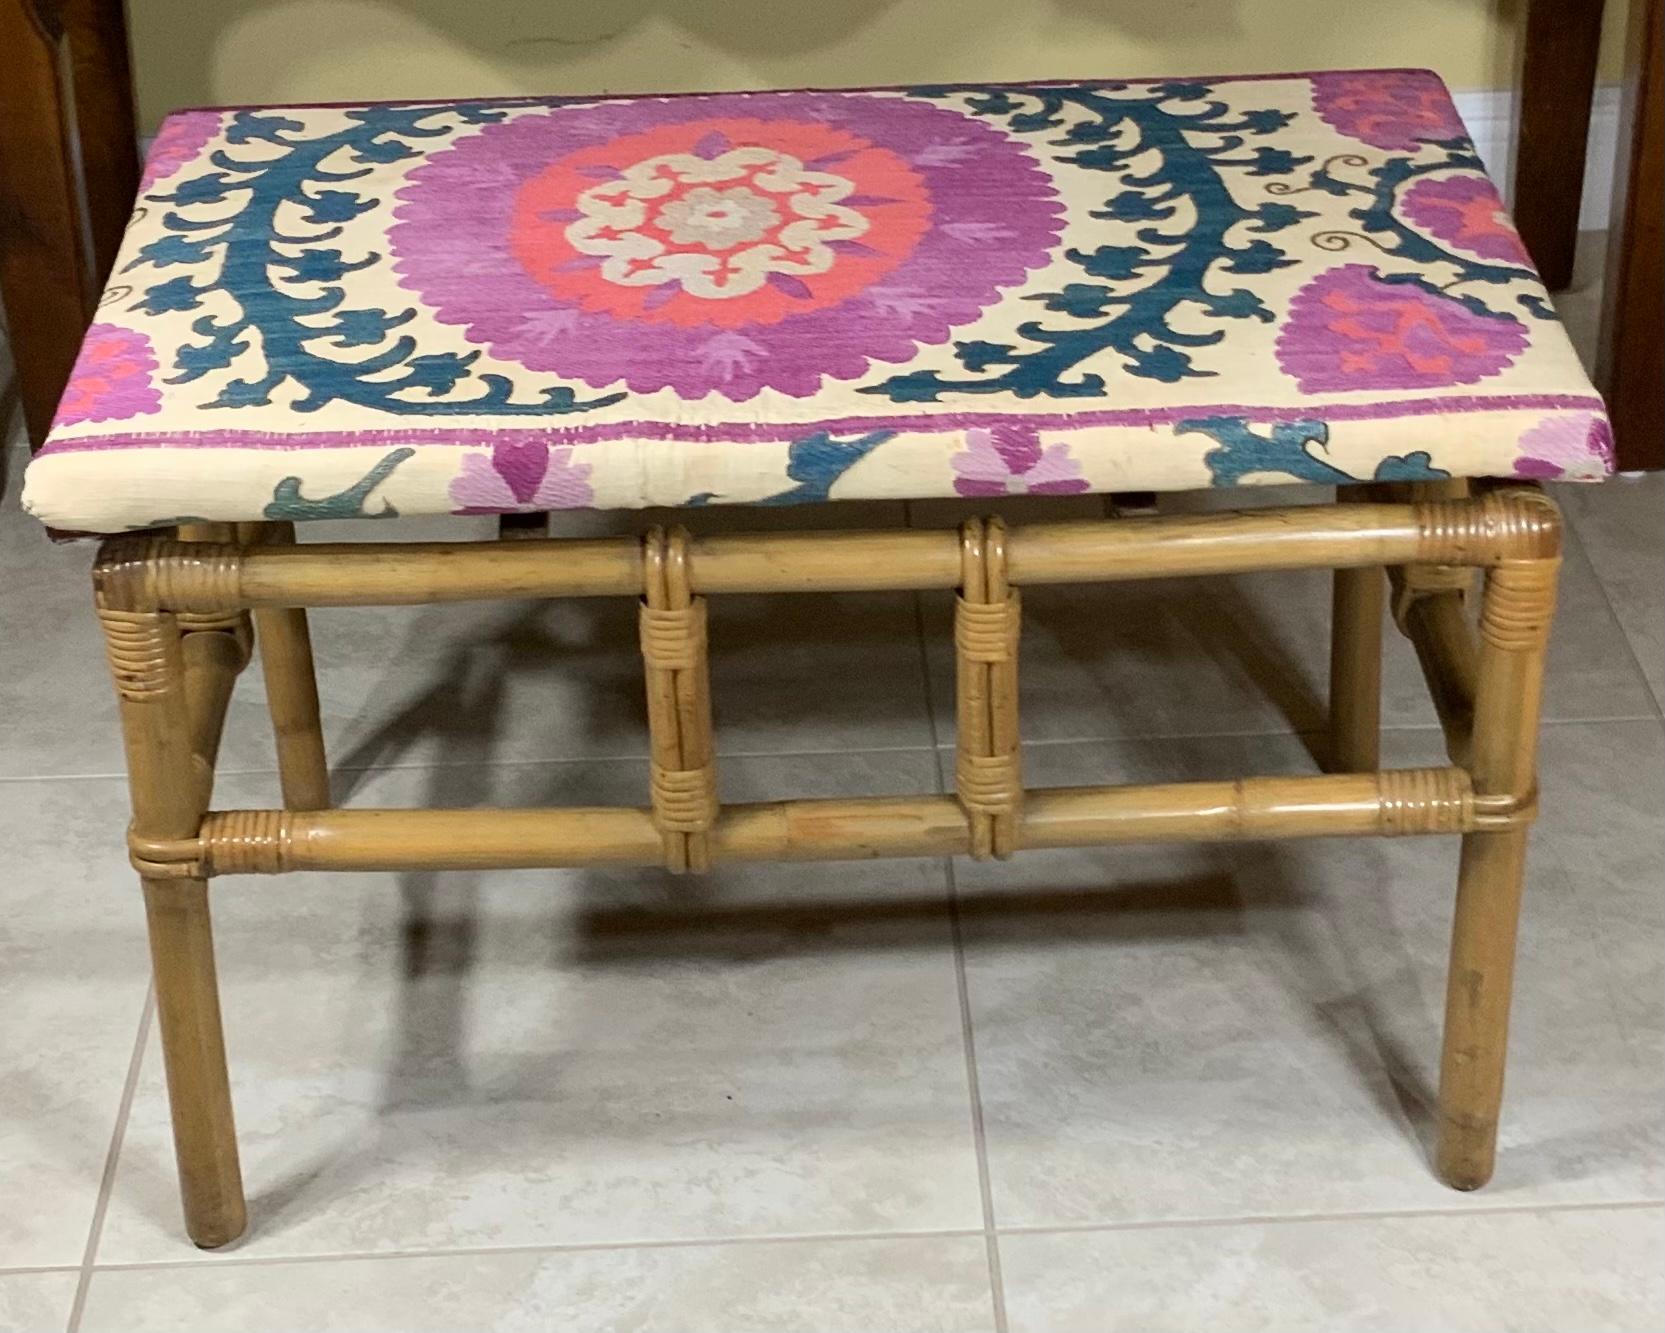 Exceptional bamboo table, artistically upholstered with beautiful 19 century hand embroidery Suzani textile.
One of a kind Decorative table.